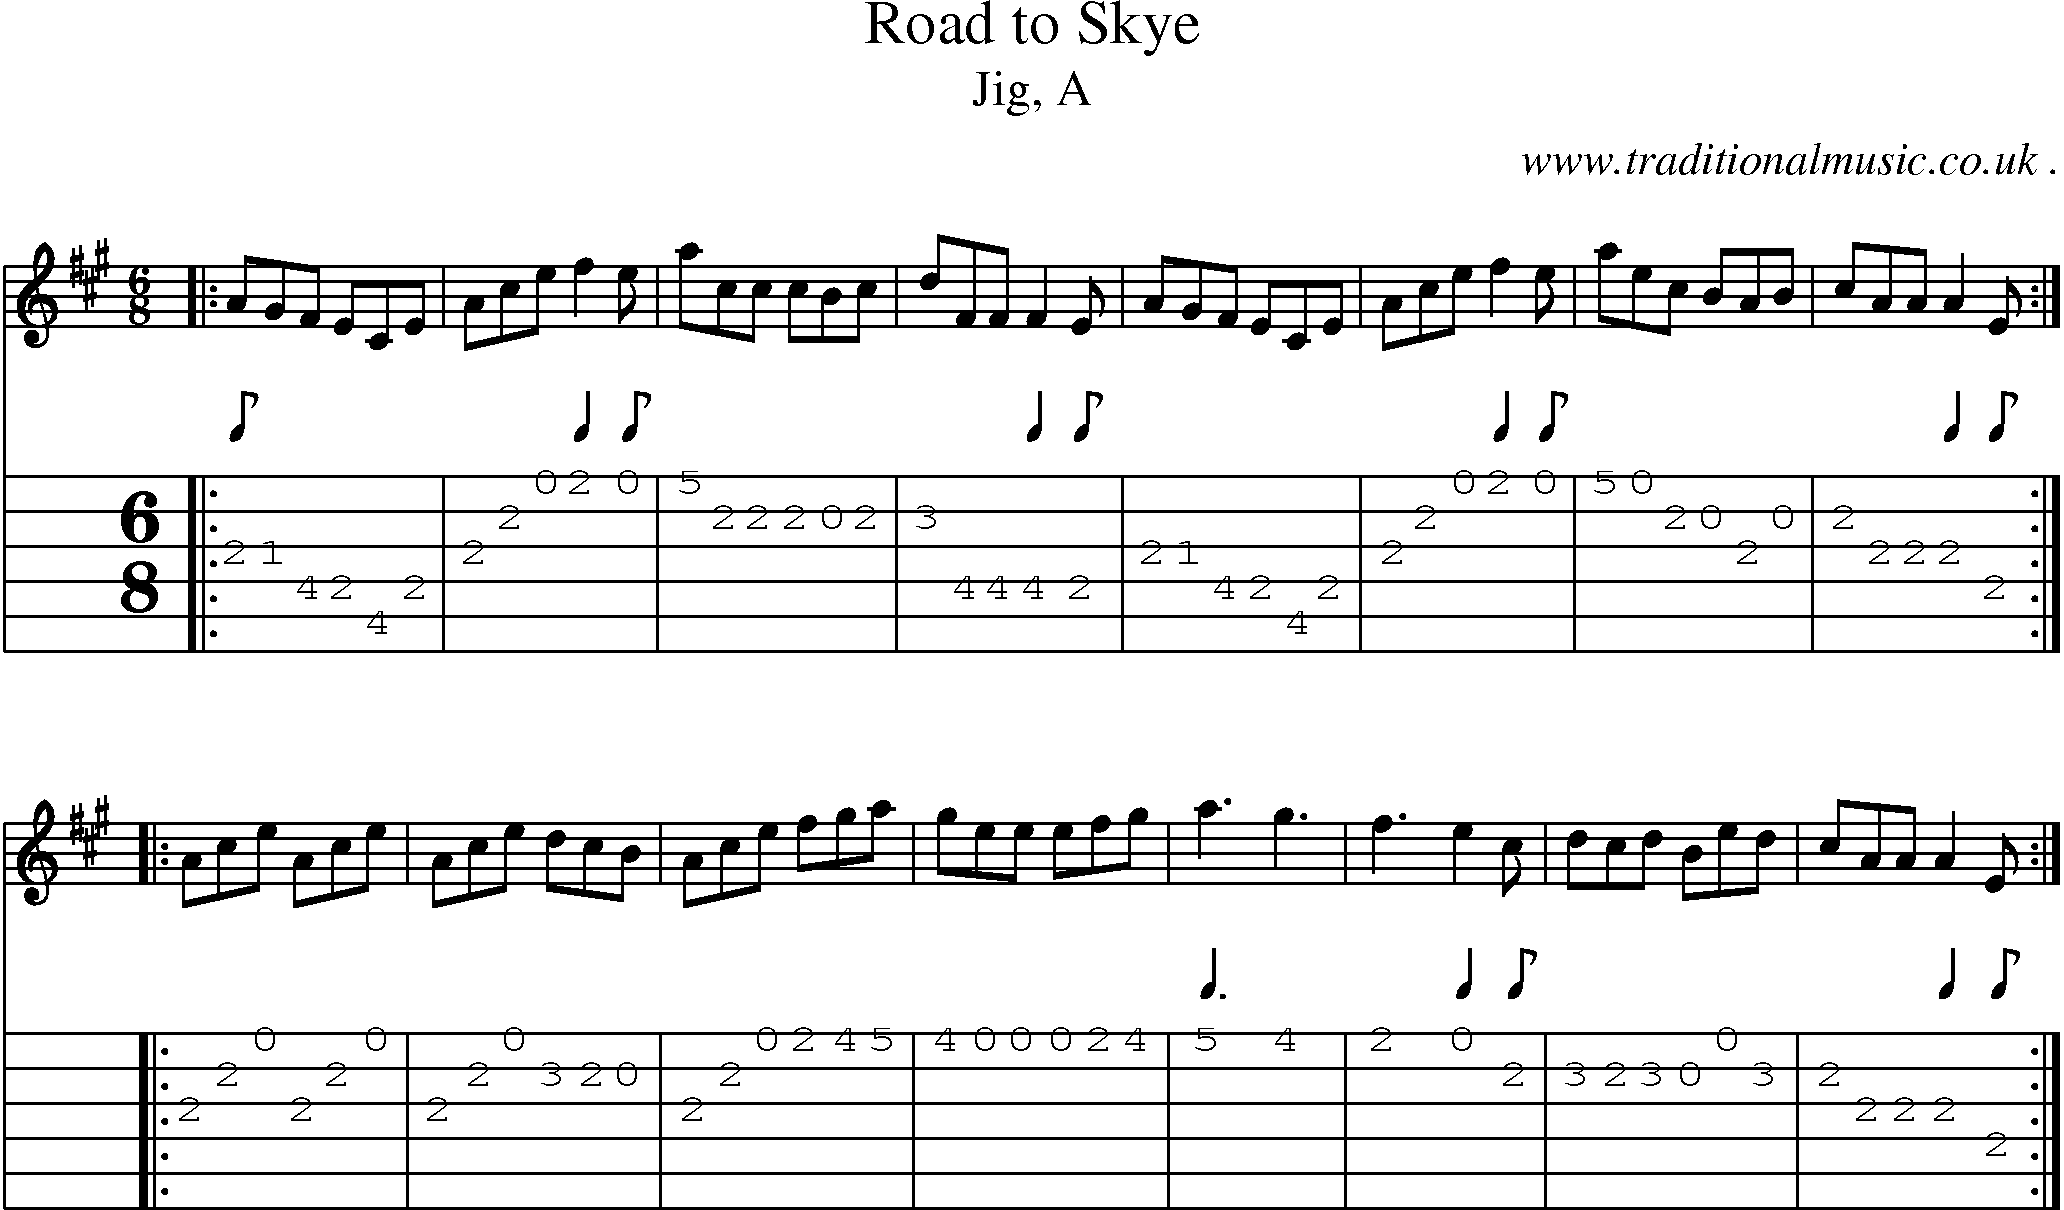 Sheet-music  score, Chords and Guitar Tabs for Road To Skye